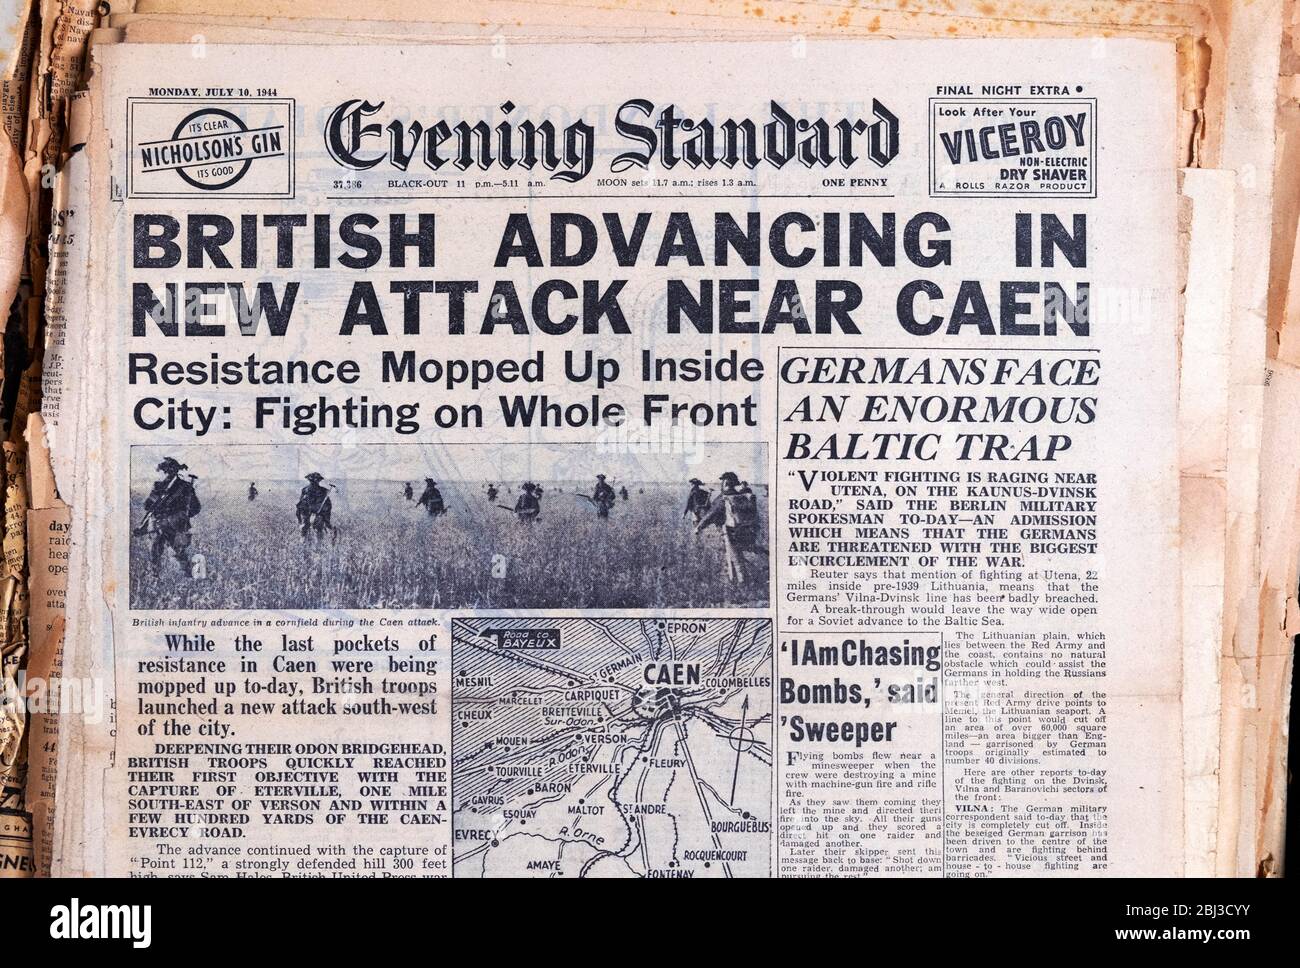 'British Advancing in New Attack Near Caen' 'Germans Face an Enormous Baltic Trap ' Evening Standard WW2 newspaper headline  10 July 1944  London  UK Stock Photo